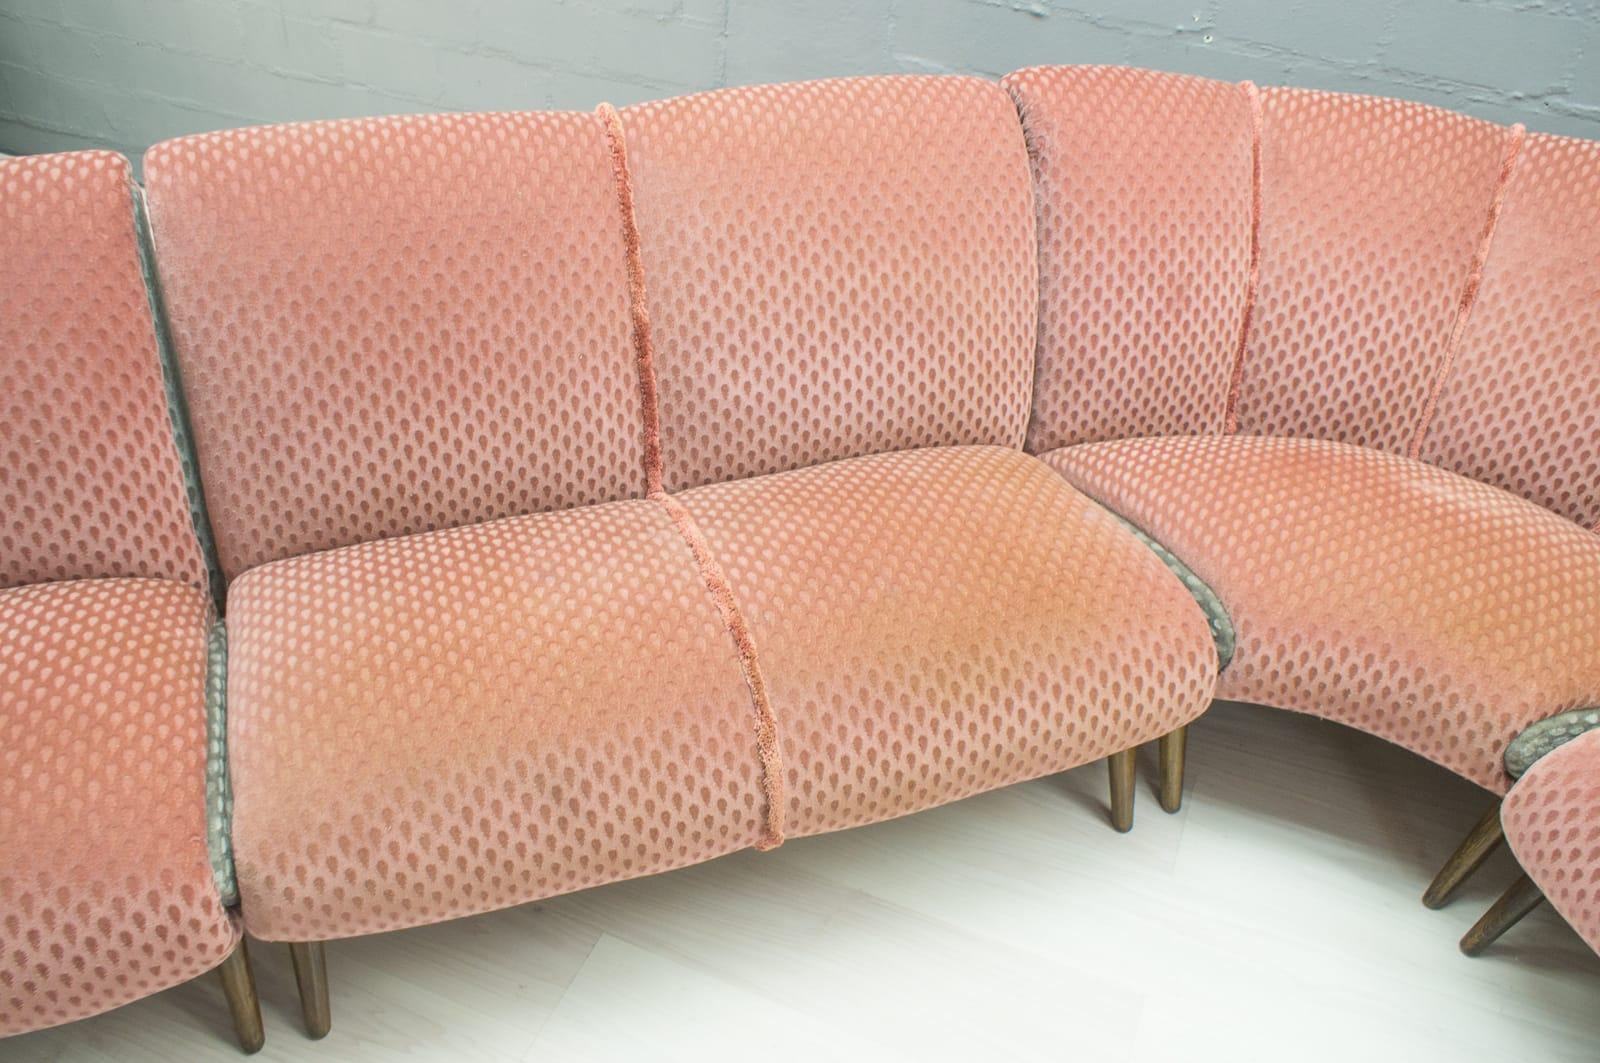 Extremely rare huge sofa set by Norman Bel Geddes from the 1950s, USA 11